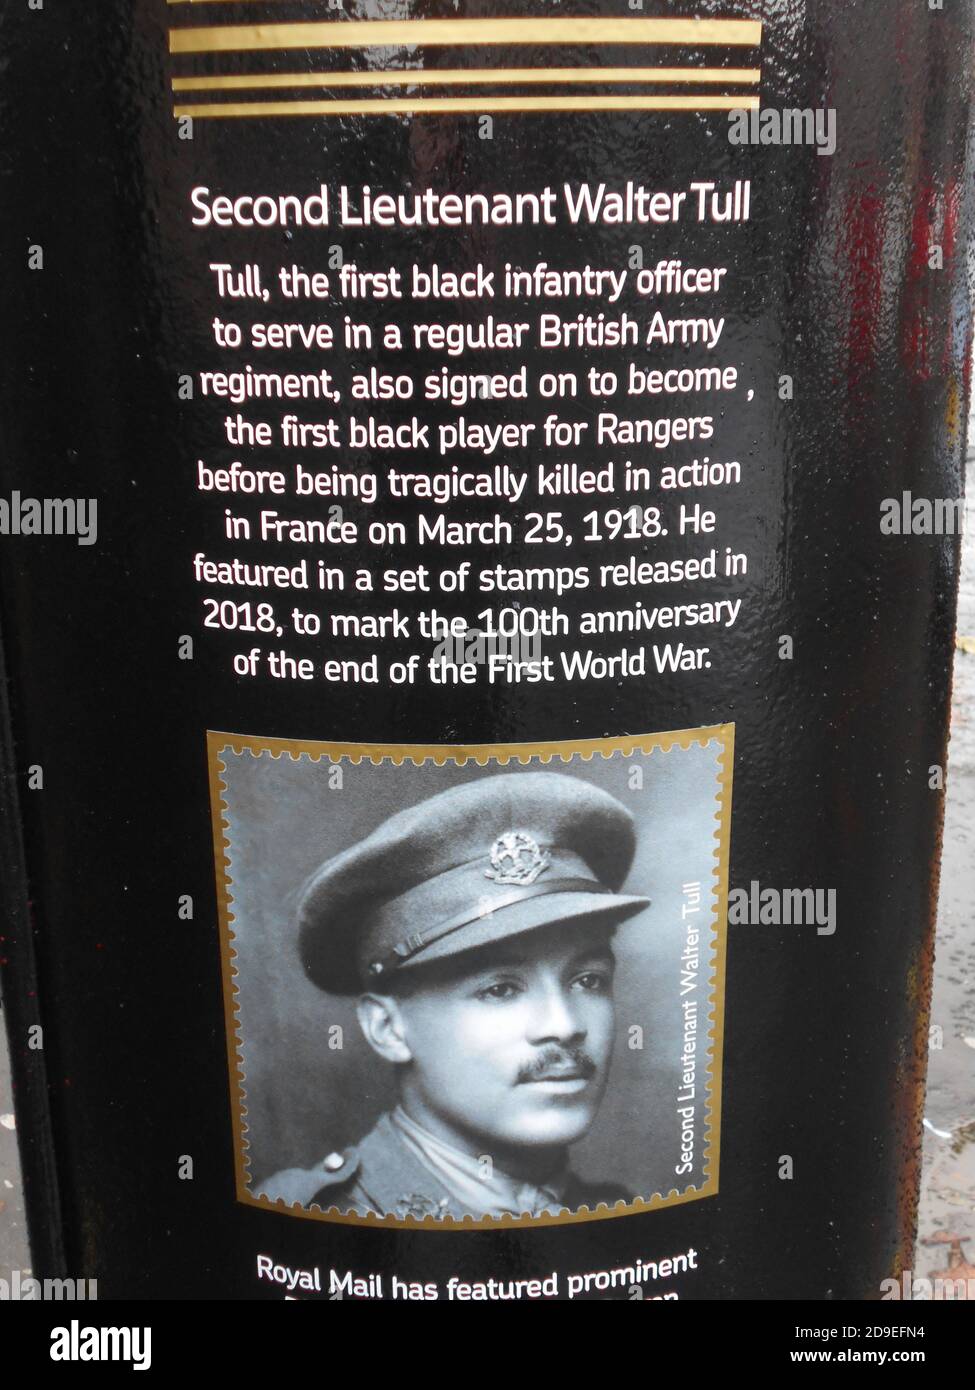 This Royal Mail post box, in Glasgow, has been painted black and gold to celebrate Black History month, October 2020. It is a tribute to Walter Tull, who was the 1st black officer in the regular British Army. He was also signed up to play for Rangers football team before being killed in action, in France, on the 25th March 1918. The inscription, seen here, tells you about Walter Tull. 2020. ALAN WYLIE/ALAMY© Stock Photo